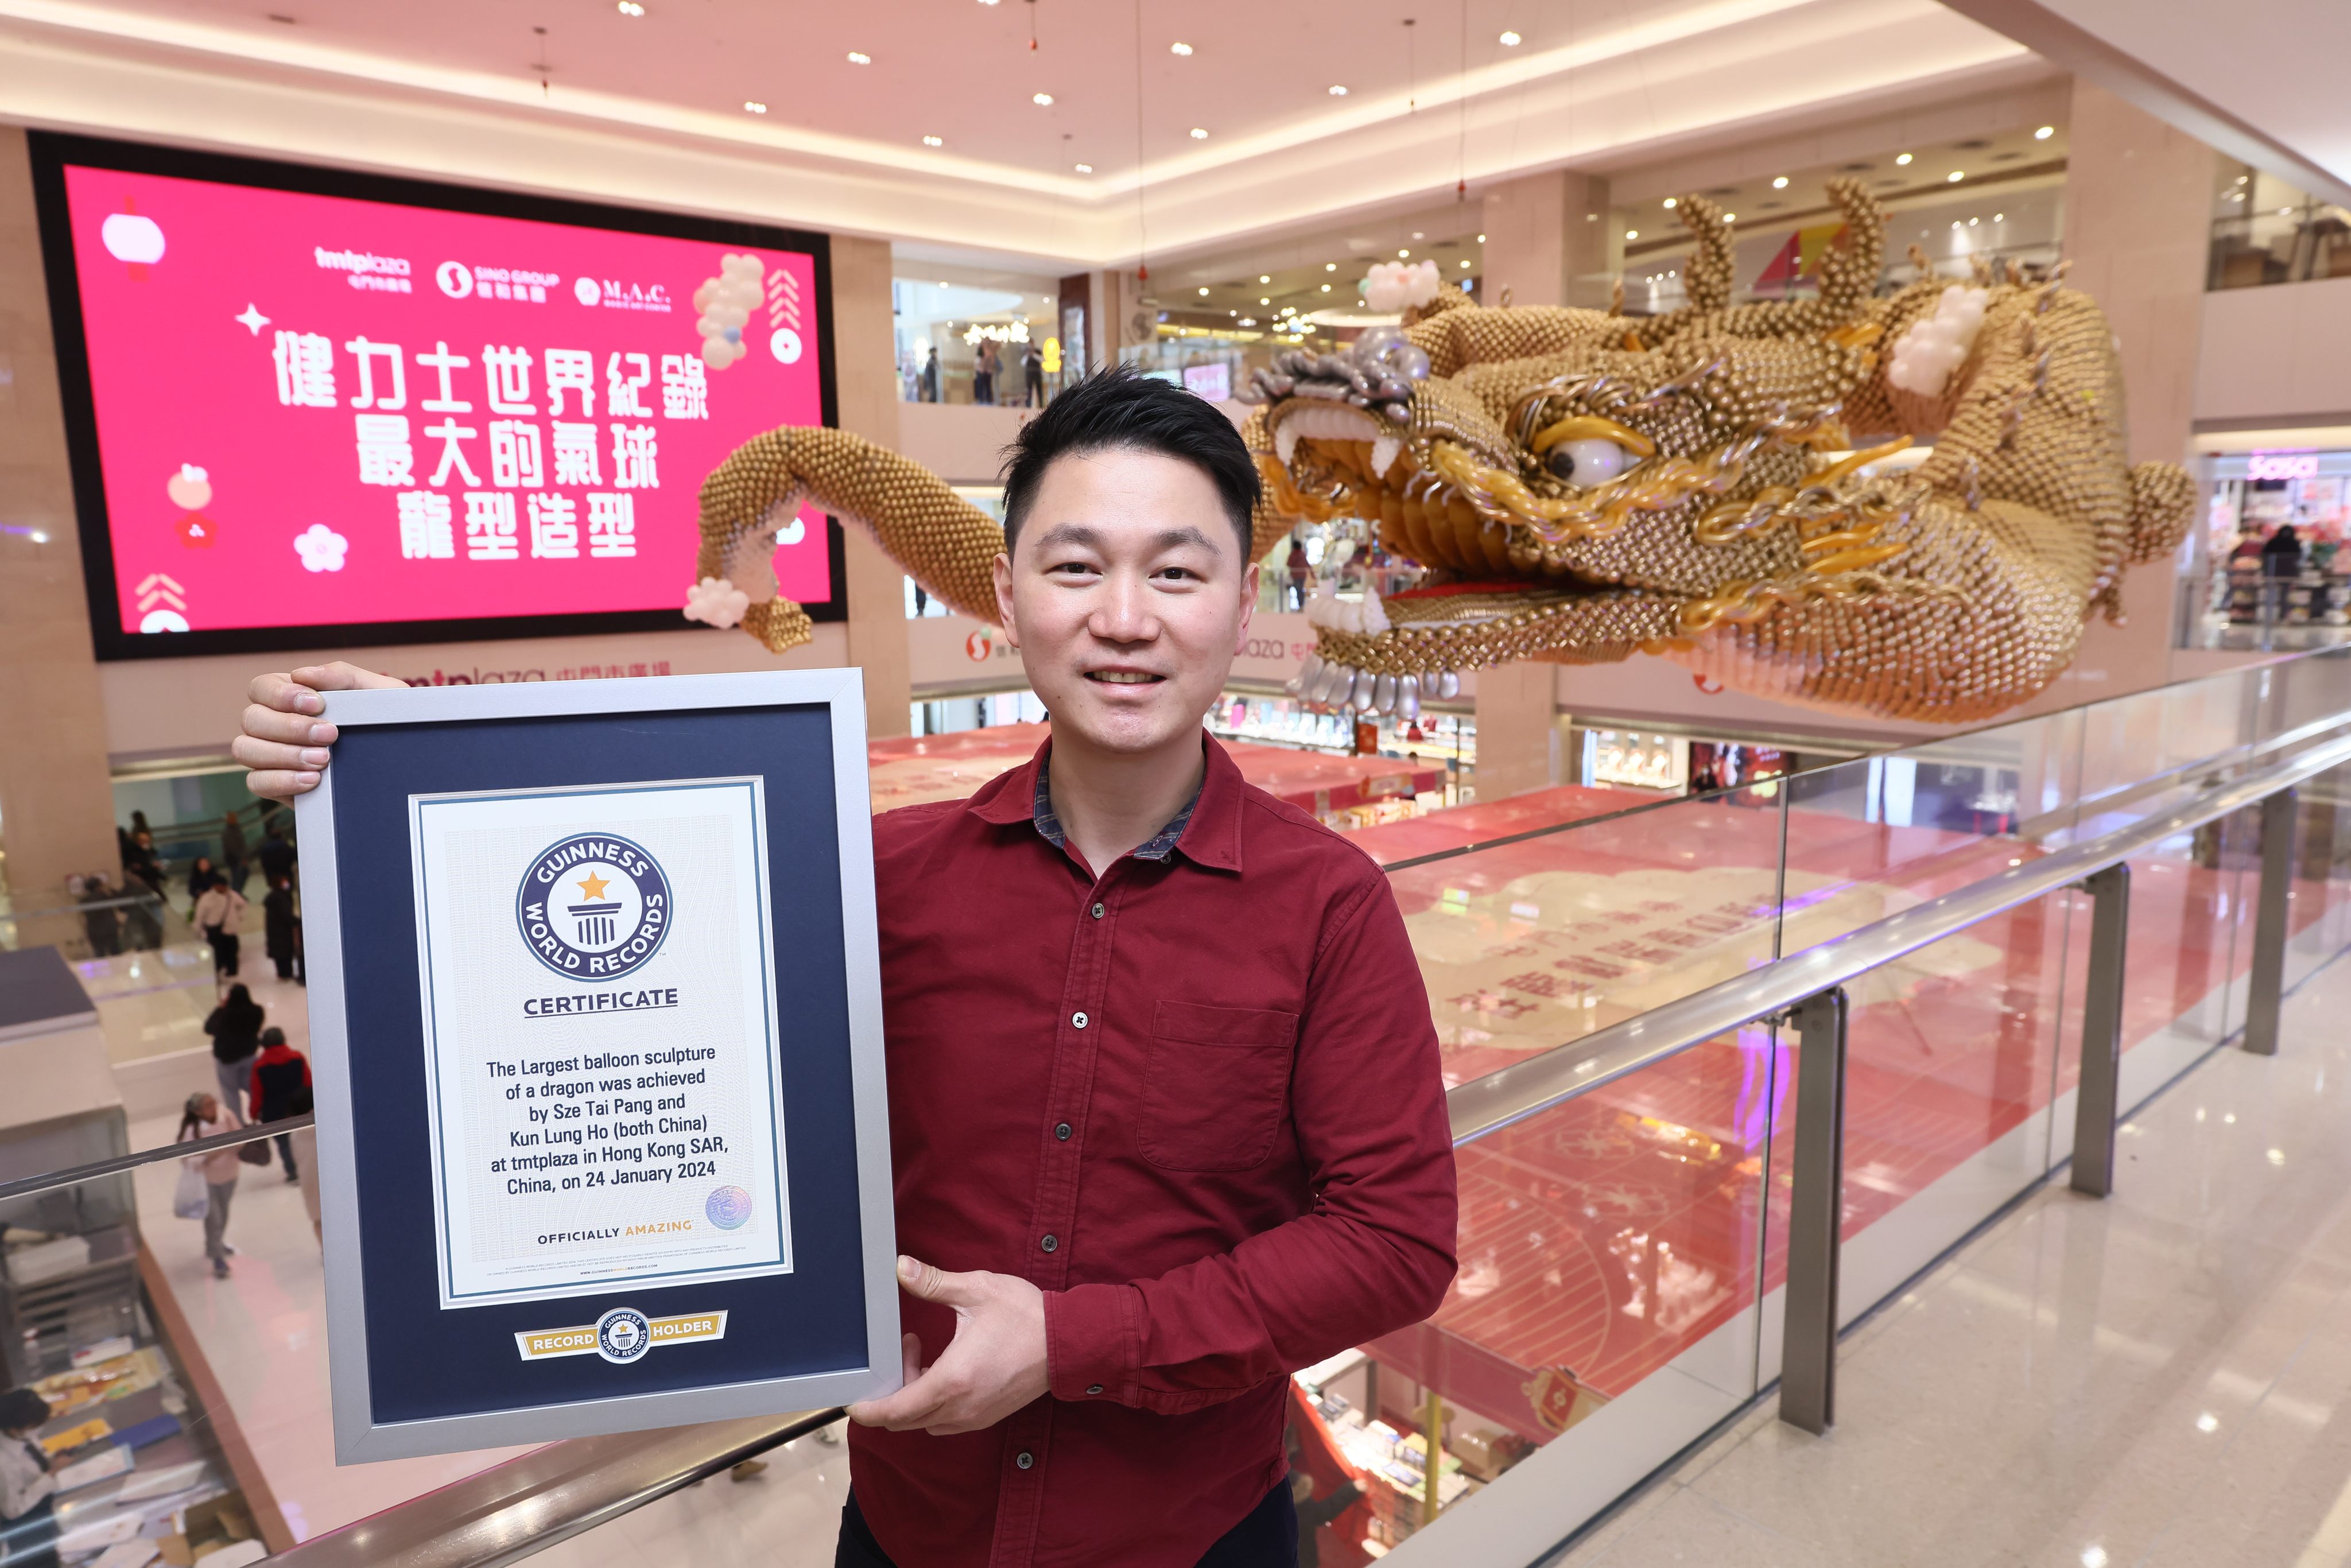 Balloon artist Wilson Pang with his 42-metre dragon sculpture - created to usher in the Year of the Dragon - and Guinness World Record certificate for the “largest balloon sculpture of a dragon” at TMTPlaza in Tuen Mun, Hong Kong. Photo: TMTPlaza